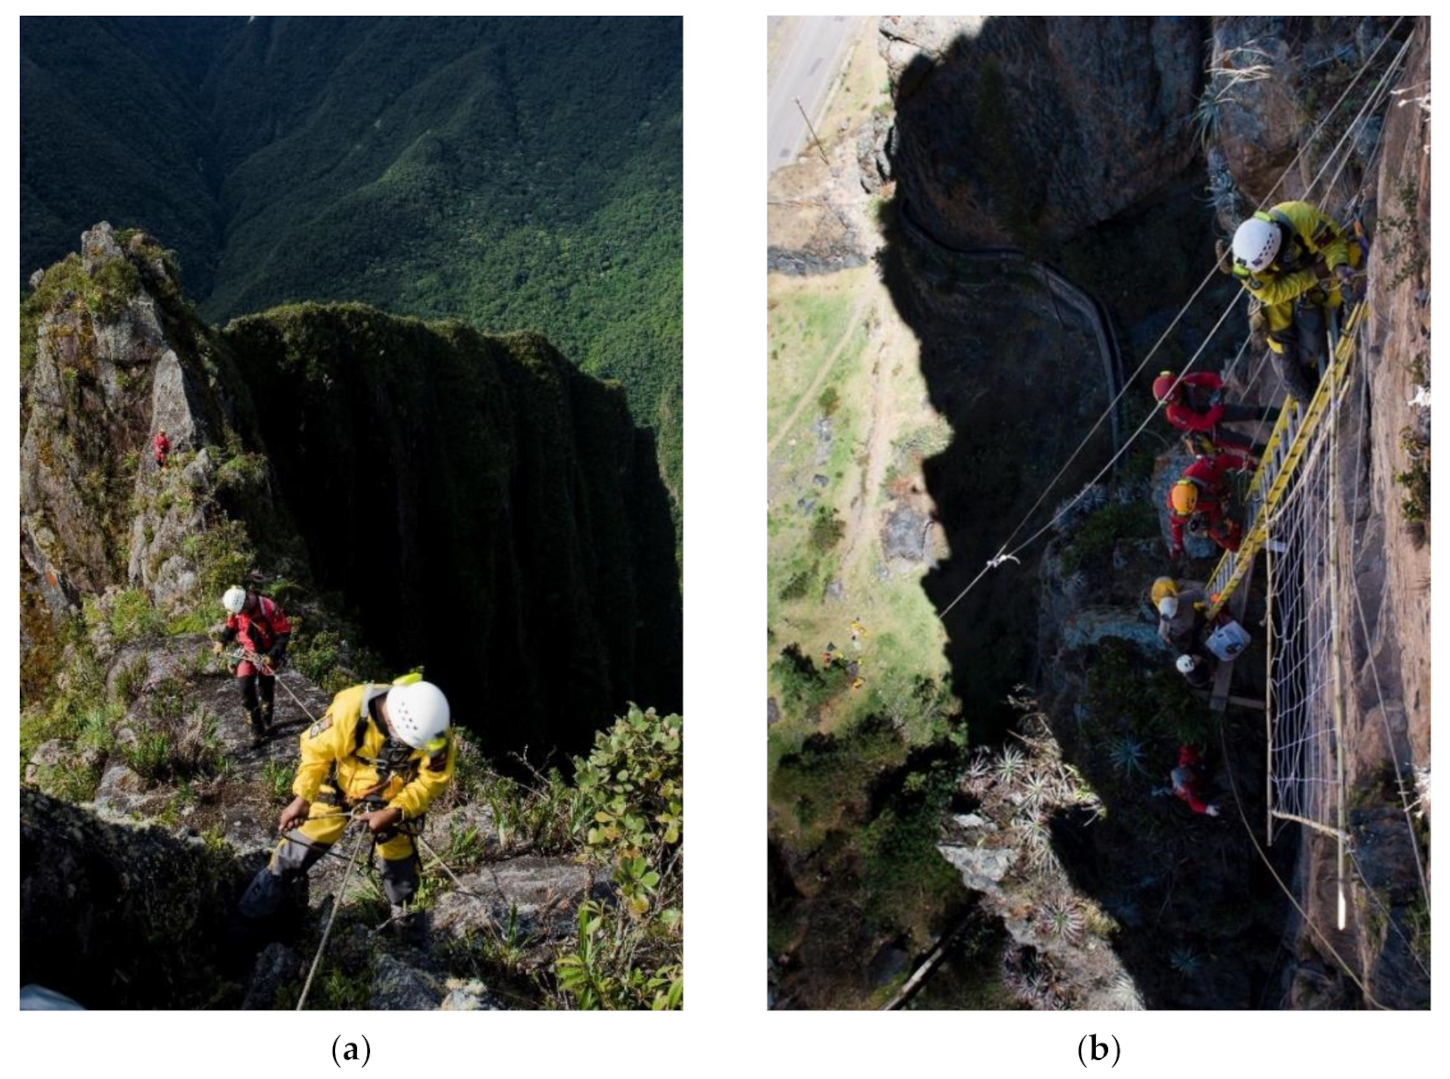 IJERPH | Free Full-Text | Vertical Archaeology: Safety in the Use of Ropes  for Scientific Research of Pre-Columbian Andean Cultures